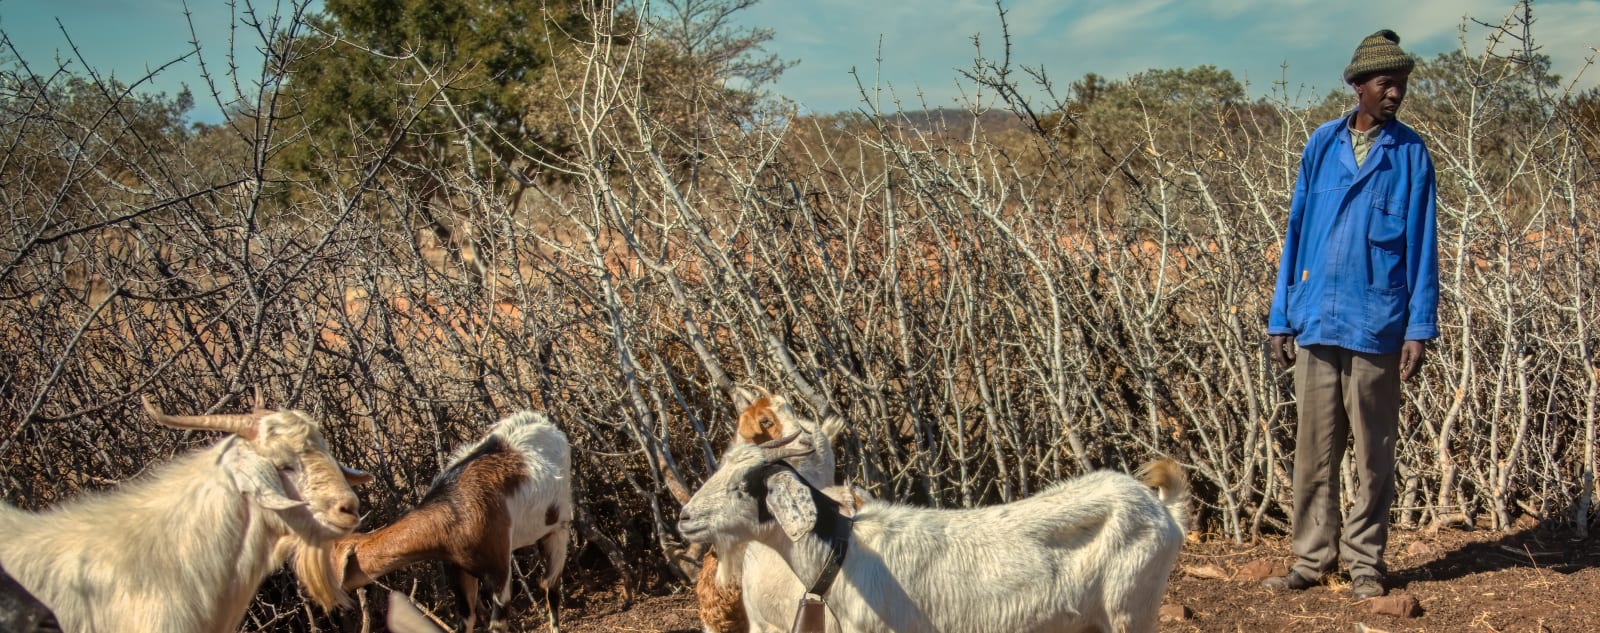 A man in a blue jacket stands with a herd of goats in front of low lying brush.